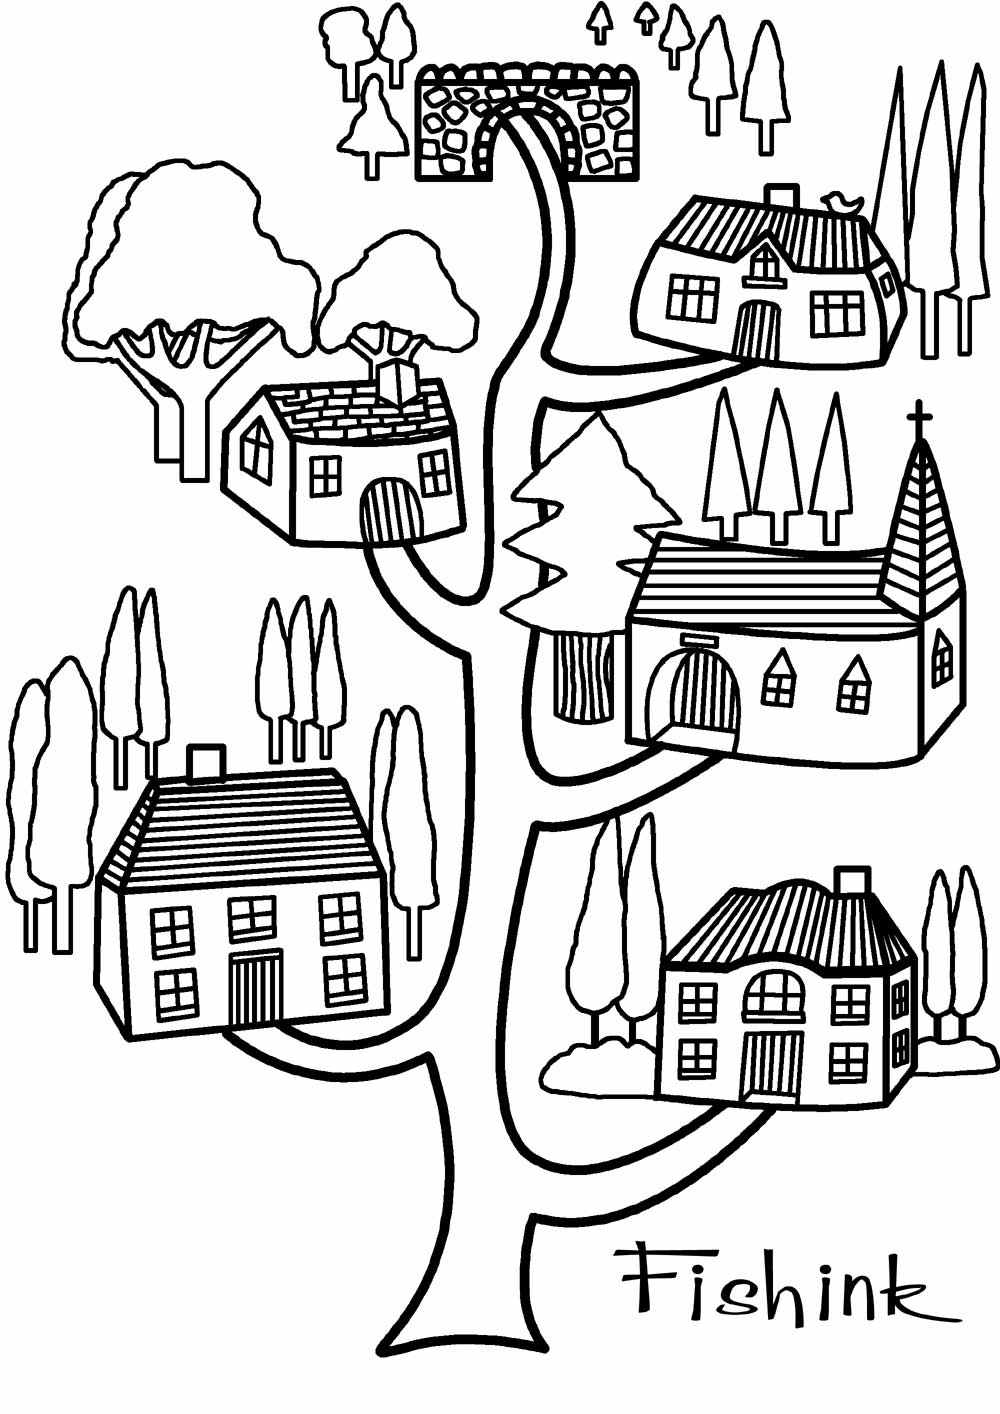 Tree House #66071 (Buildings and Architecture) – Printable coloring pages